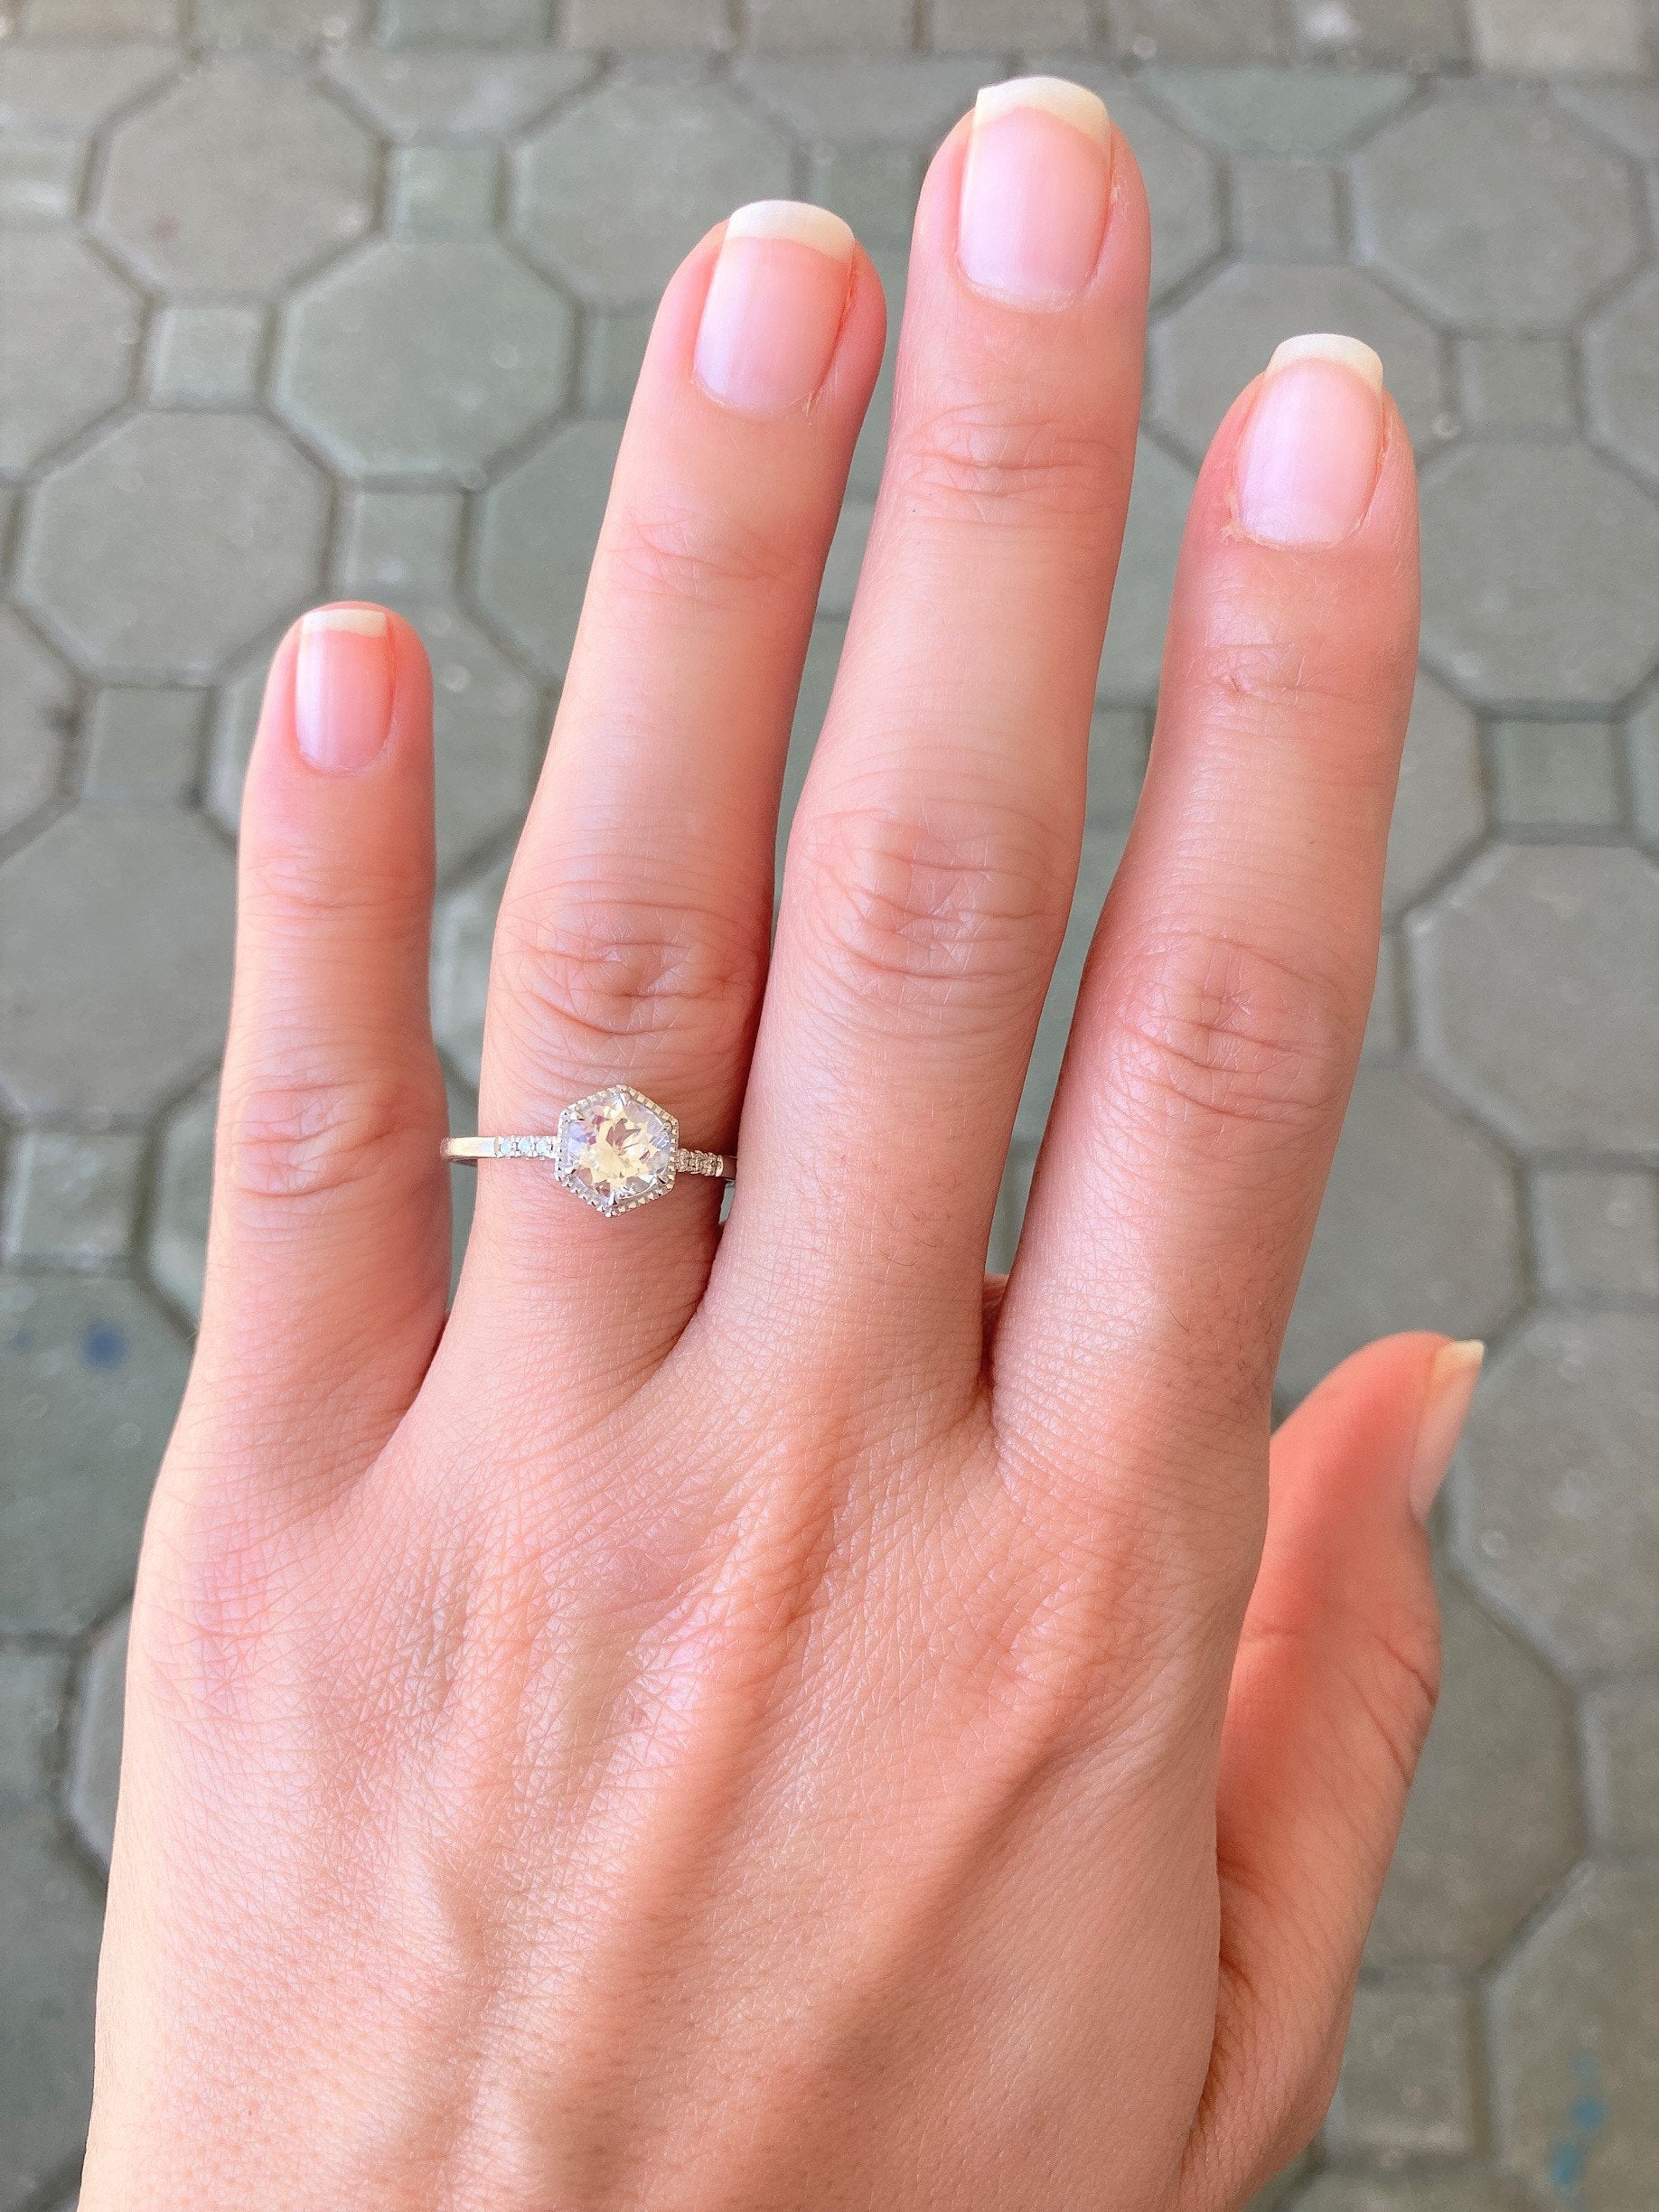 Solitaire Engagement Ring Rainbow Moonstone by NorthCoastCottage, $199.00 |  Rainbow moonstone engagement ring, Handmade engagement rings, Solitaire  engagement ring